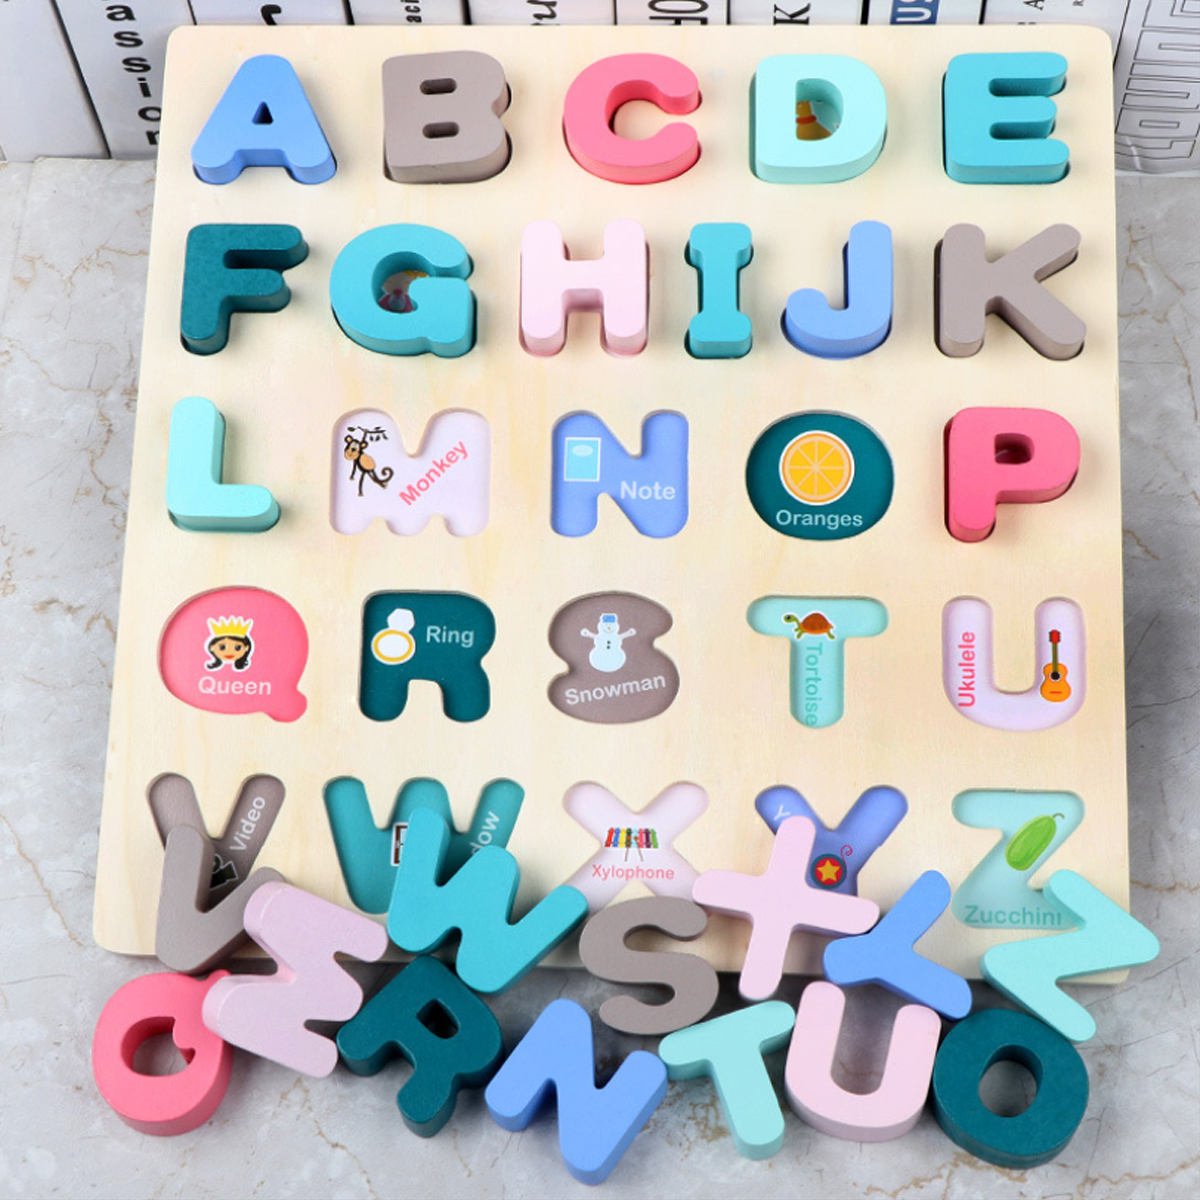 Alphanumeric-Board-Wooden-Jigsaw-Volume-Wooden-Baby-Young-Children-Early-Education-Educational-Toys-1635558-4